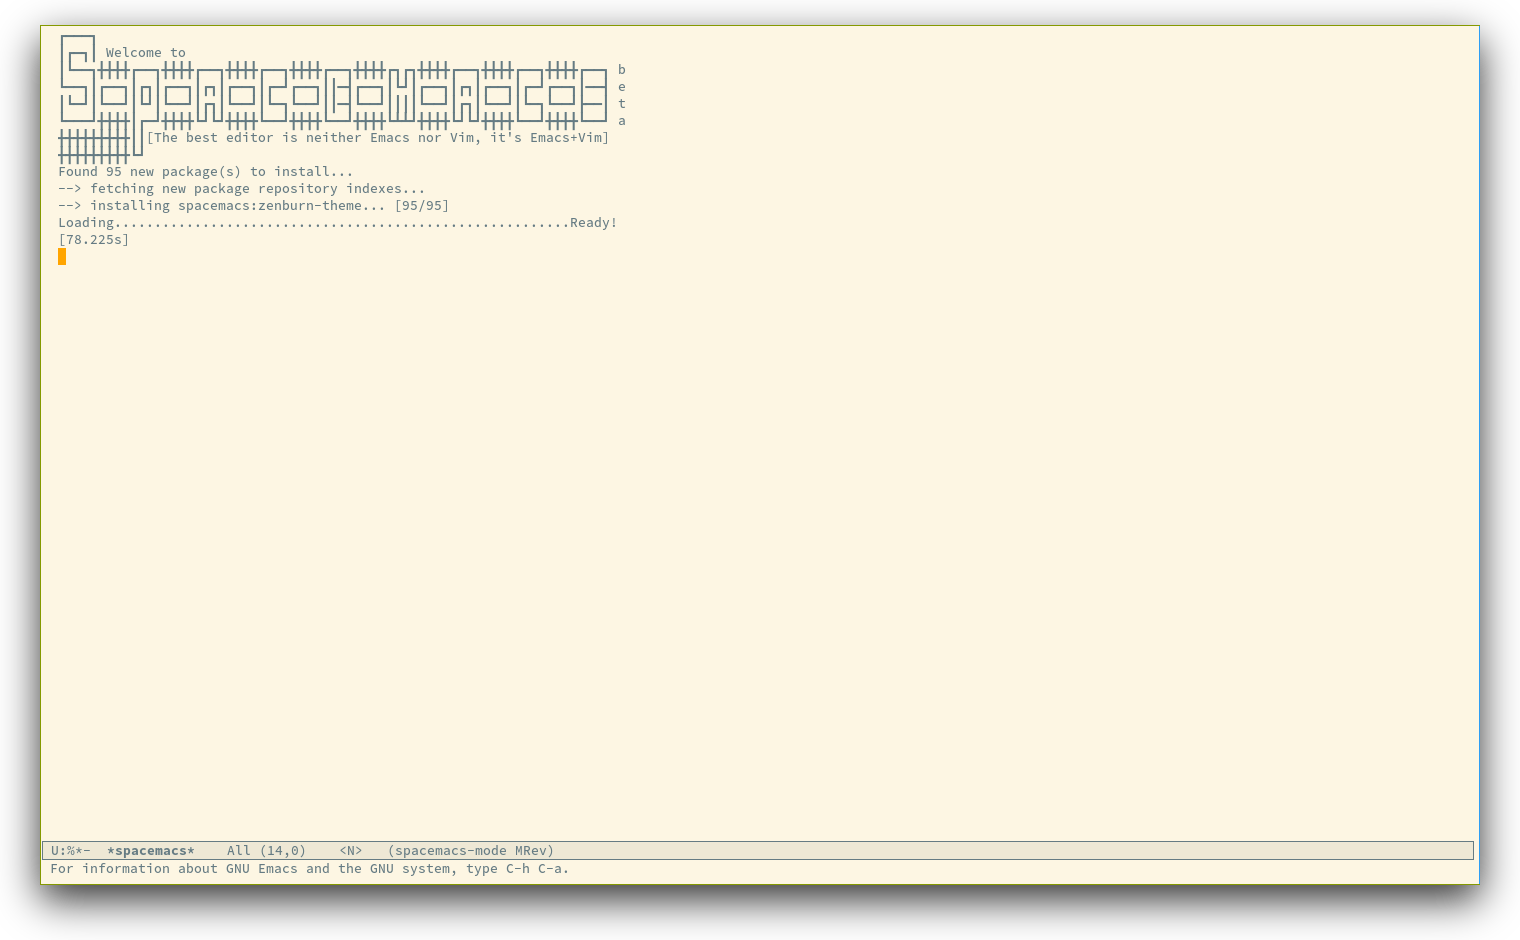 /TakeV/spacemacs/media/commit/d04ed6dc25231465296c273b6fe758b92ca7a6c1/doc/img/spacemacs-startup.png